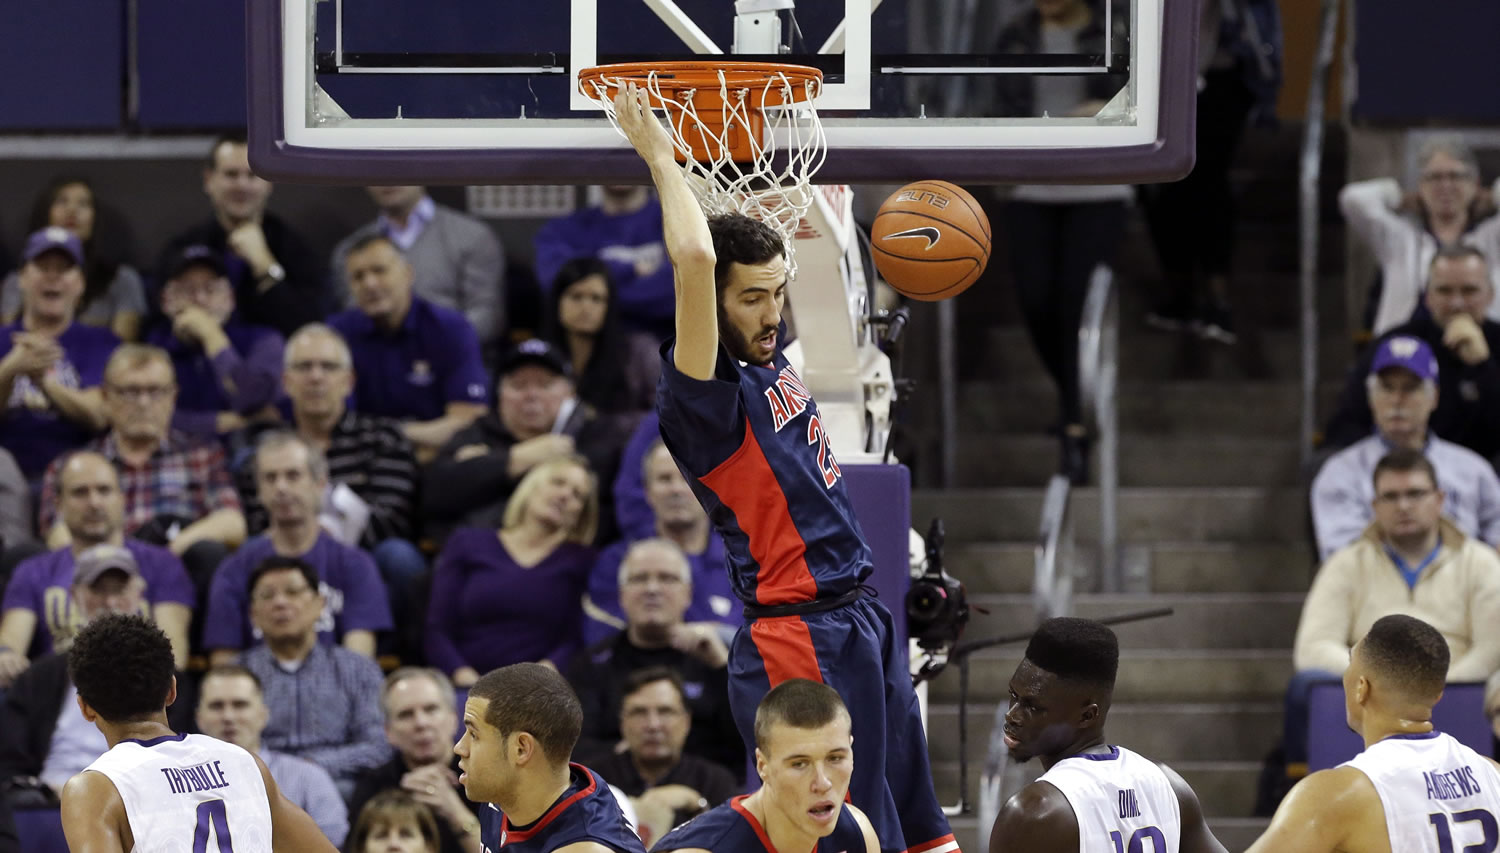 Arizona's Mark Tollefsen, top, dunks against Washington during the first half of an NCAA college basketball game Saturday, Feb. 6, 2016, in Seattle.